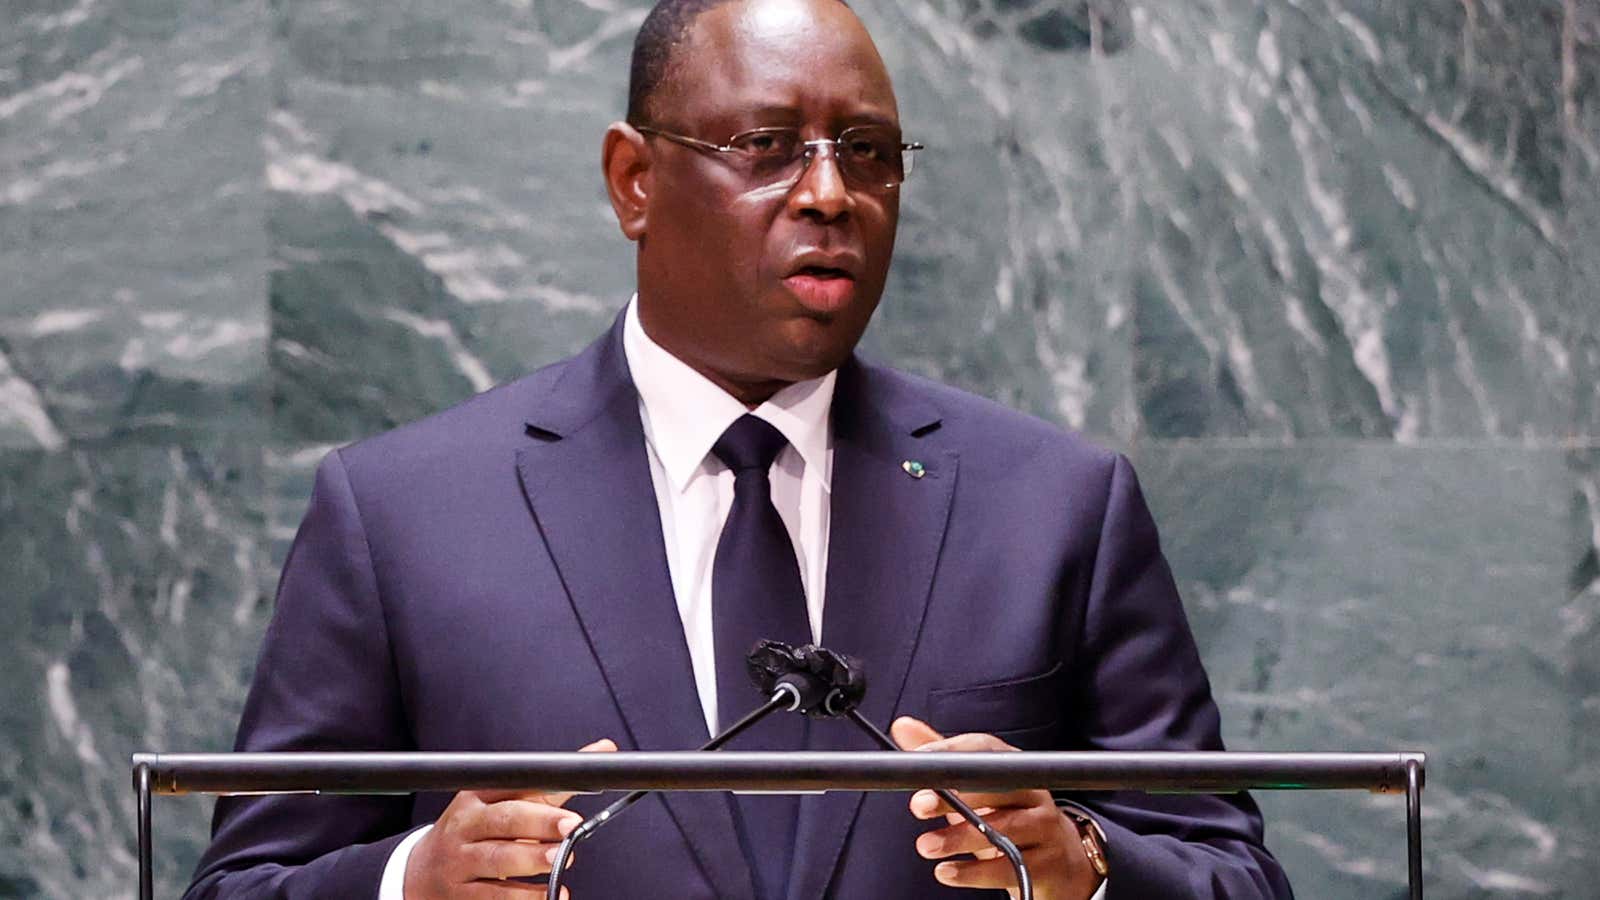 Sall, the African Union chair, raised the subject of African permanence on the UN security council